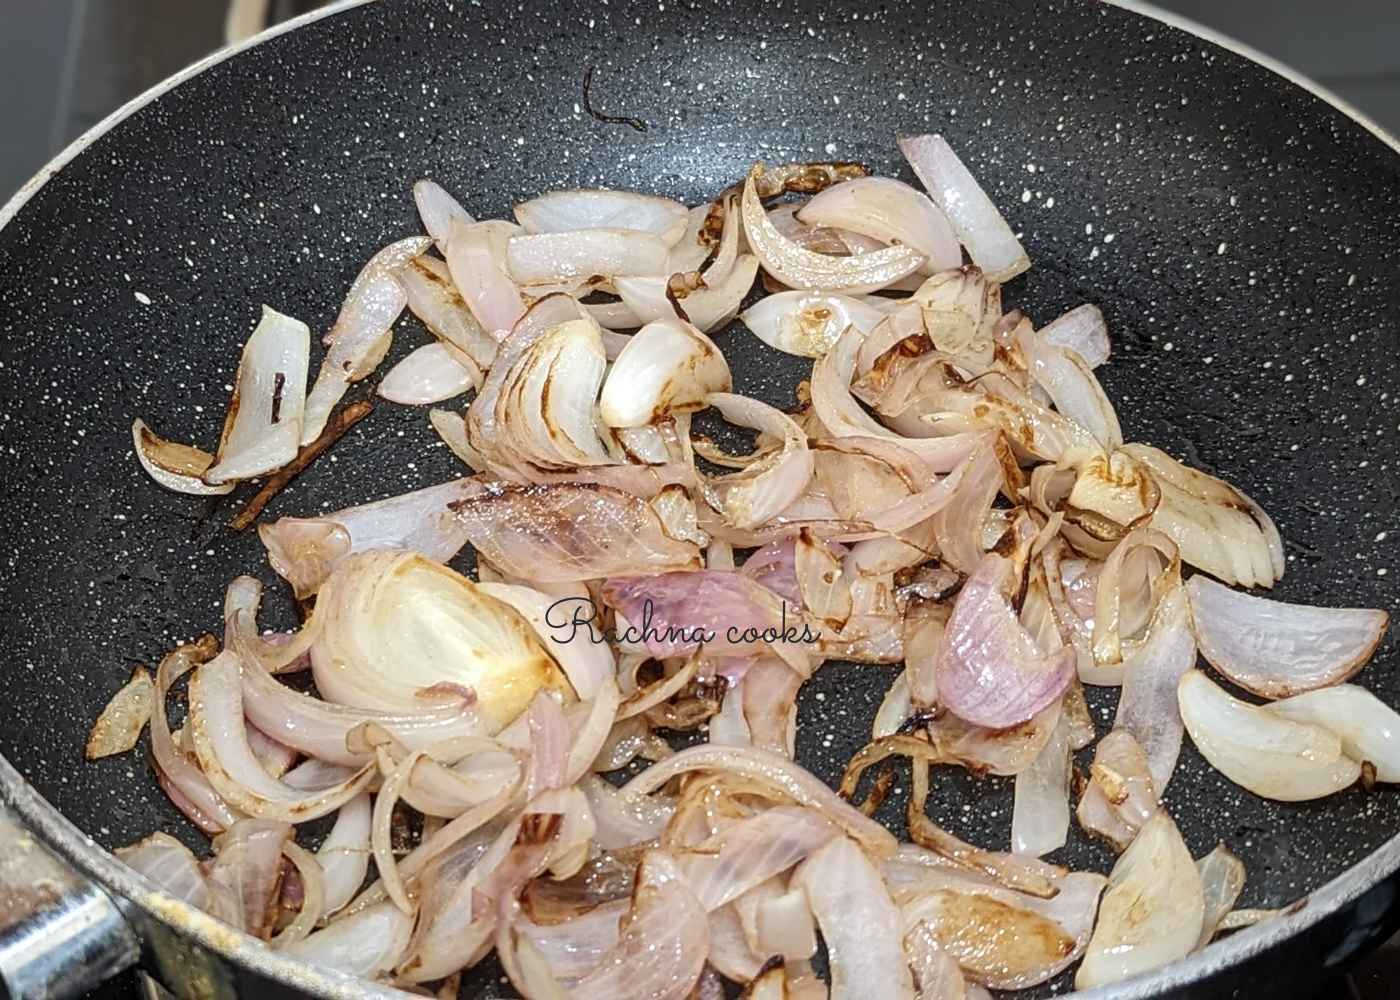 Sauteed onions in a pan.